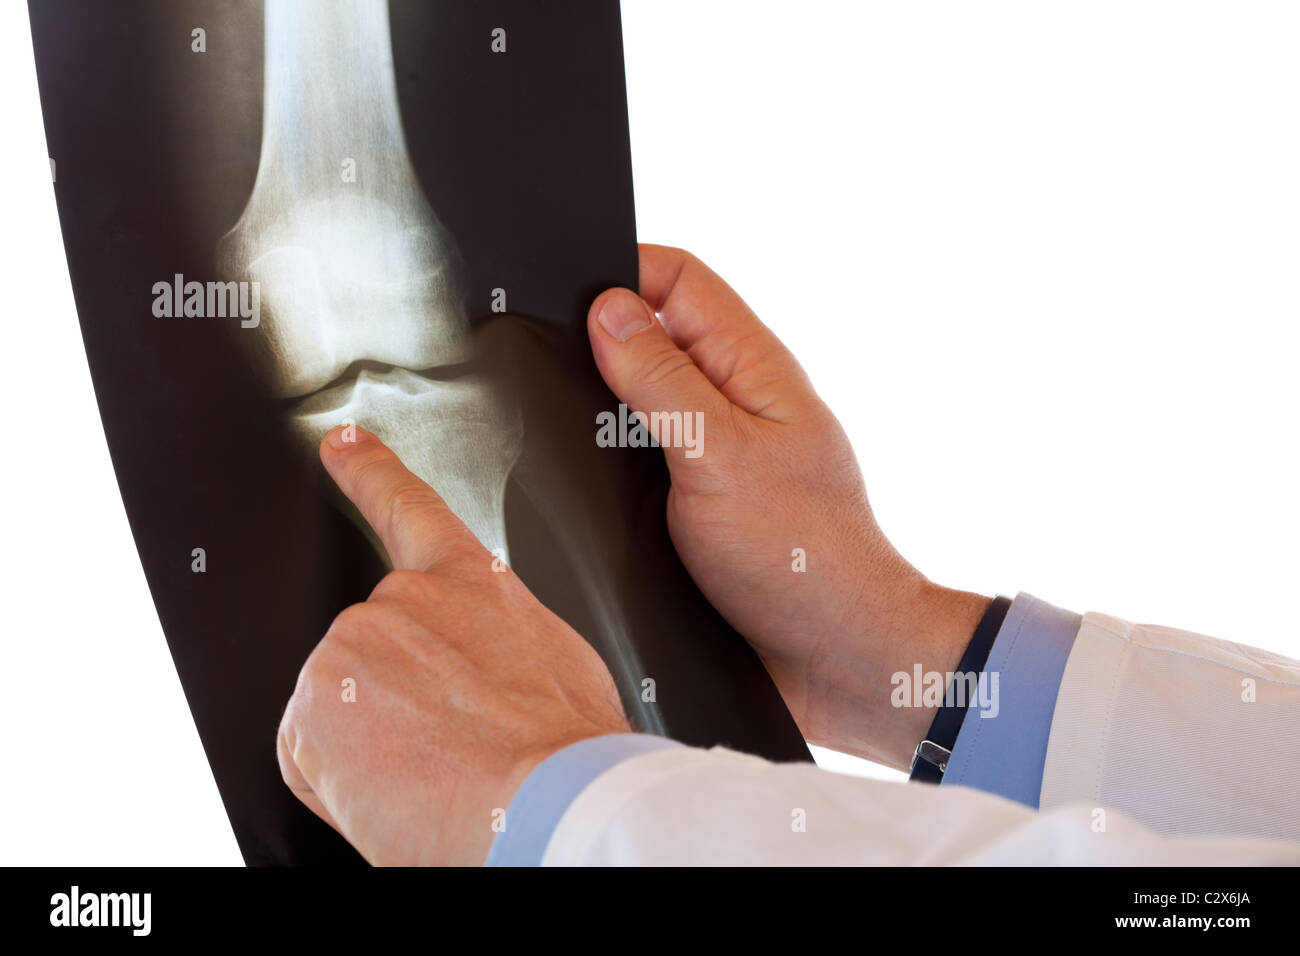 Medical doctor pointing with finger at radiograph of knee joint bone. Isolated on white background. Stock Photo